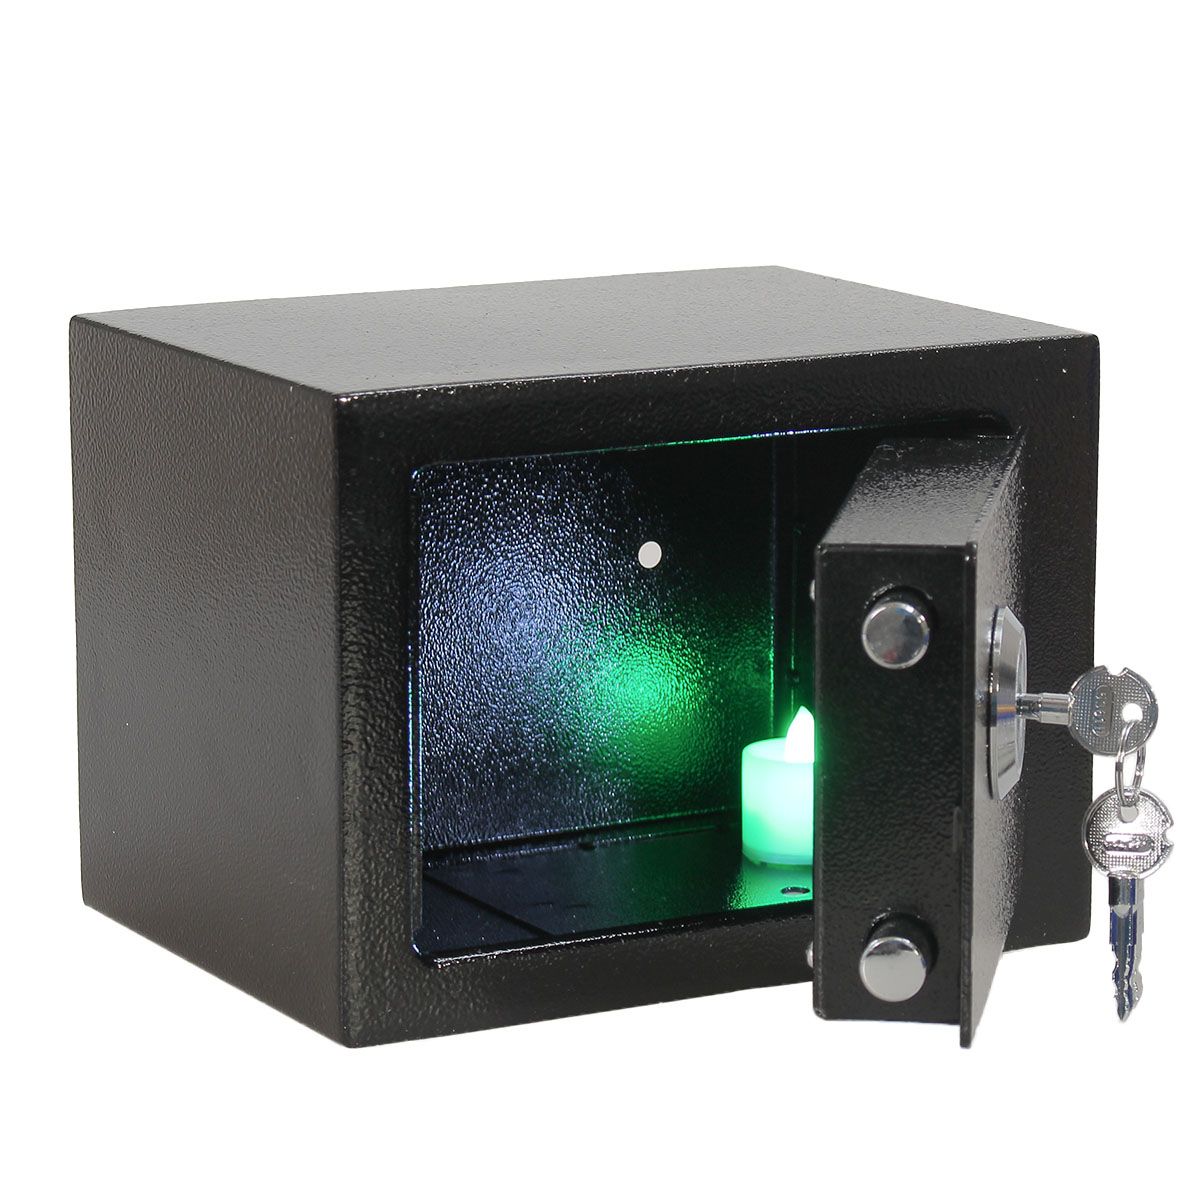 Iron-Steel-Black-Key-Operated-Safe-Box-Money-Cash-Strong-Steel-for-Home-Office-1048779